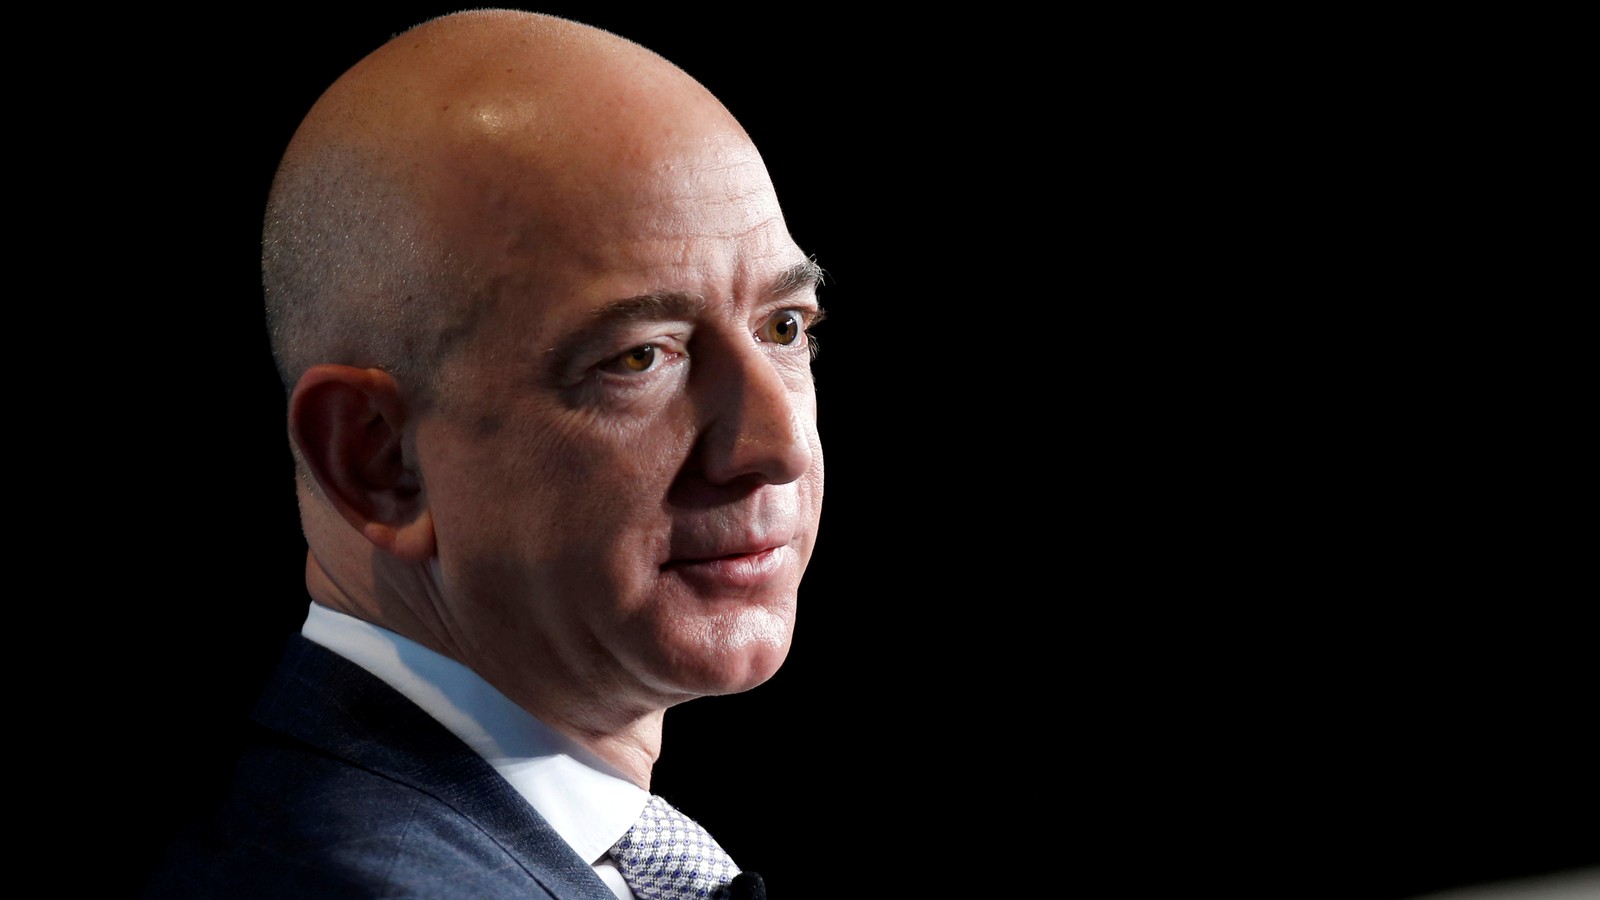 Family Blackmail Sex Videos - Sextortion: Is Jeff Bezos's Stand a Turning Point? - The Atlantic